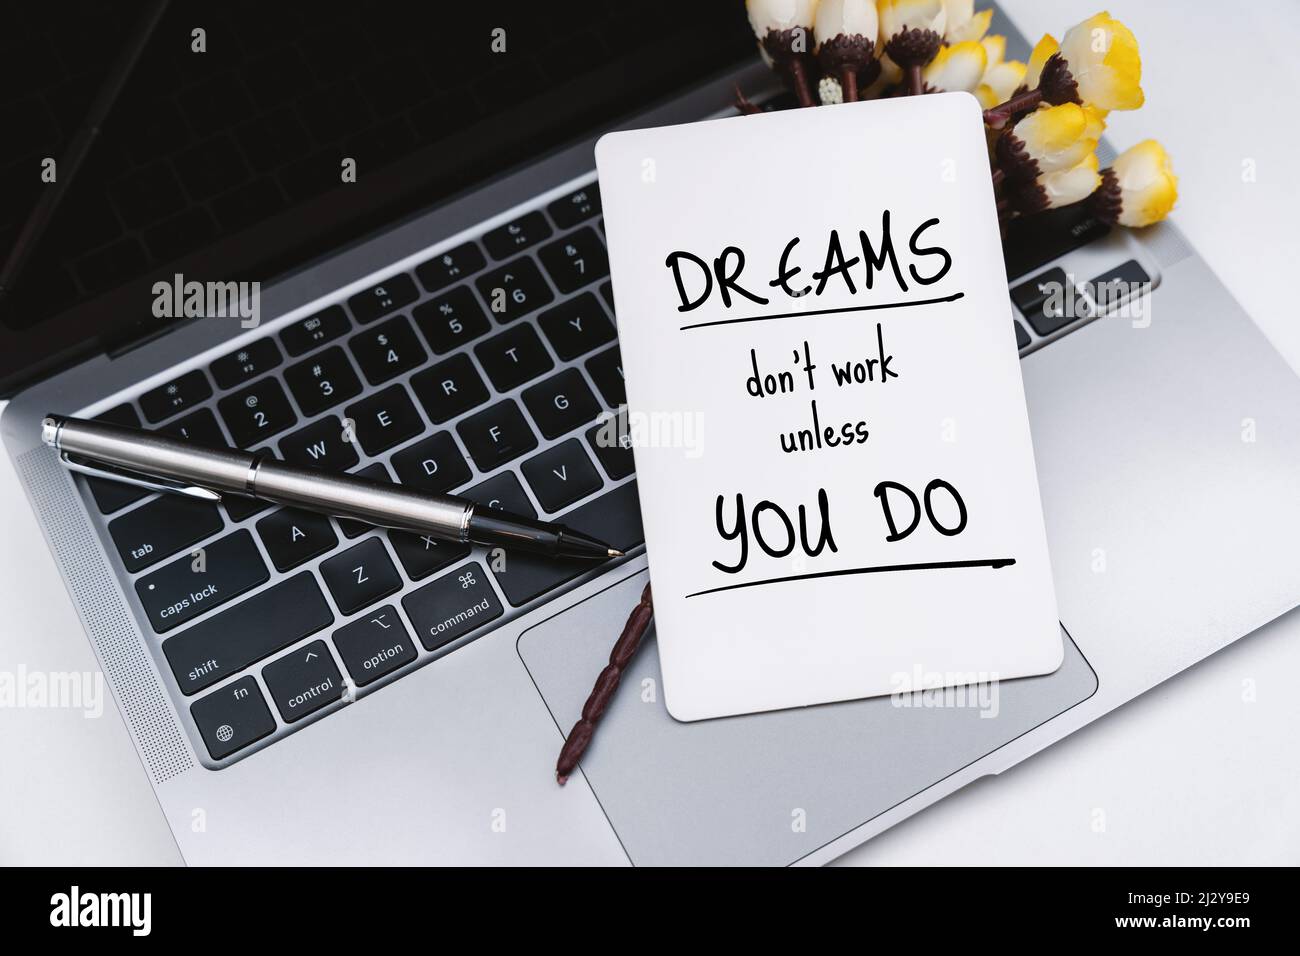 White Paper on Laptop With Inspirational Quote . Dreams Don't Work Unless You Do. Stock Photo